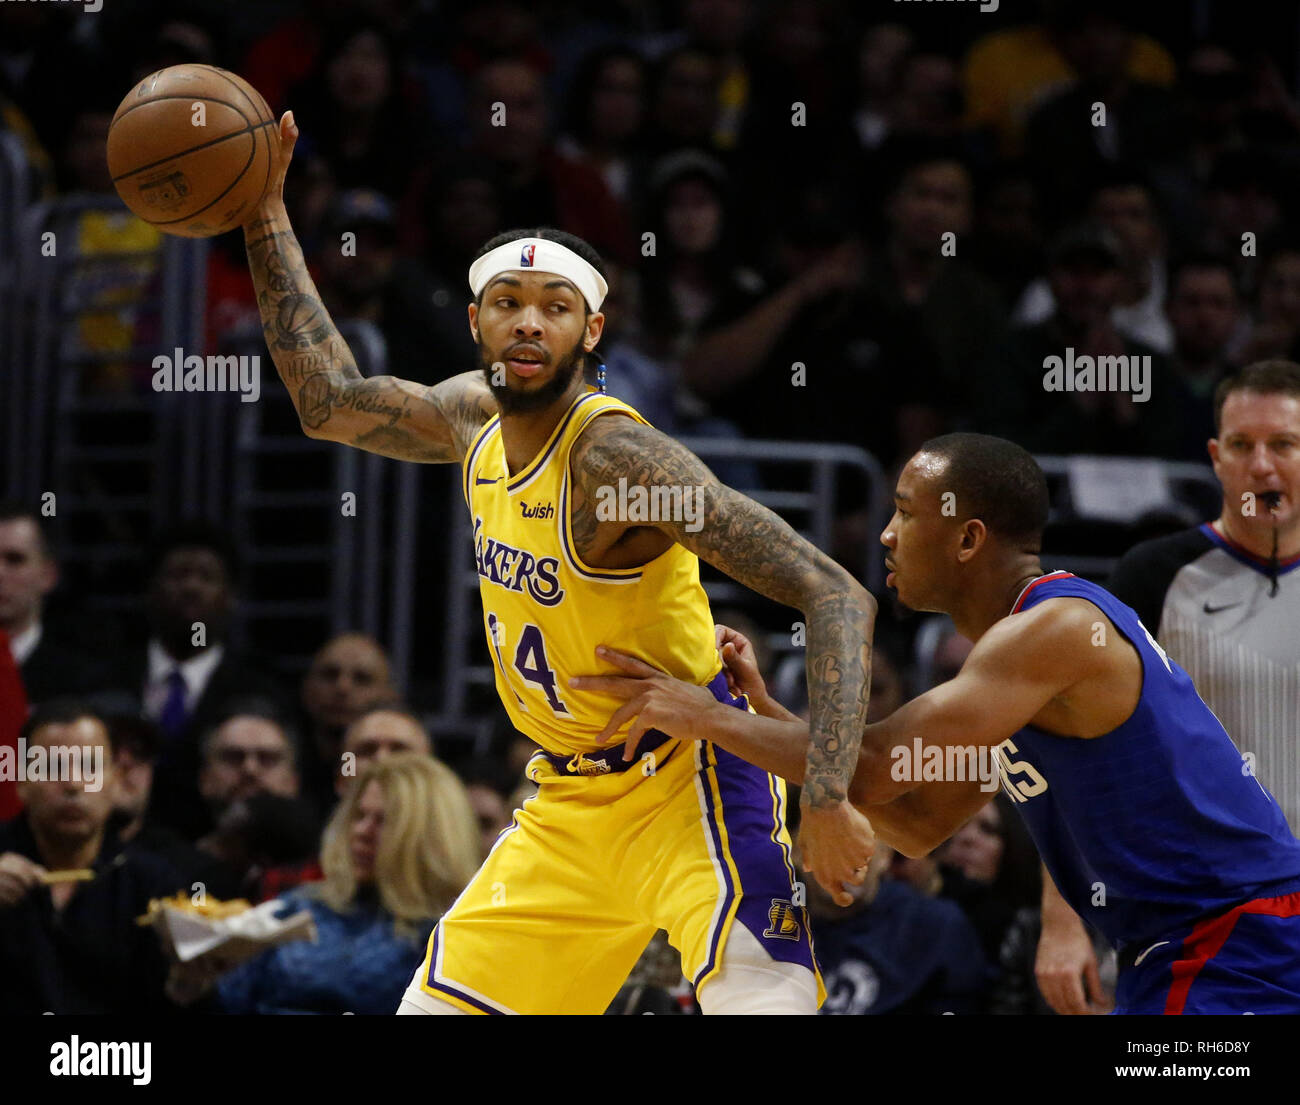 Brandon Ingram out of next two Los Angeles Lakers games, NBA News